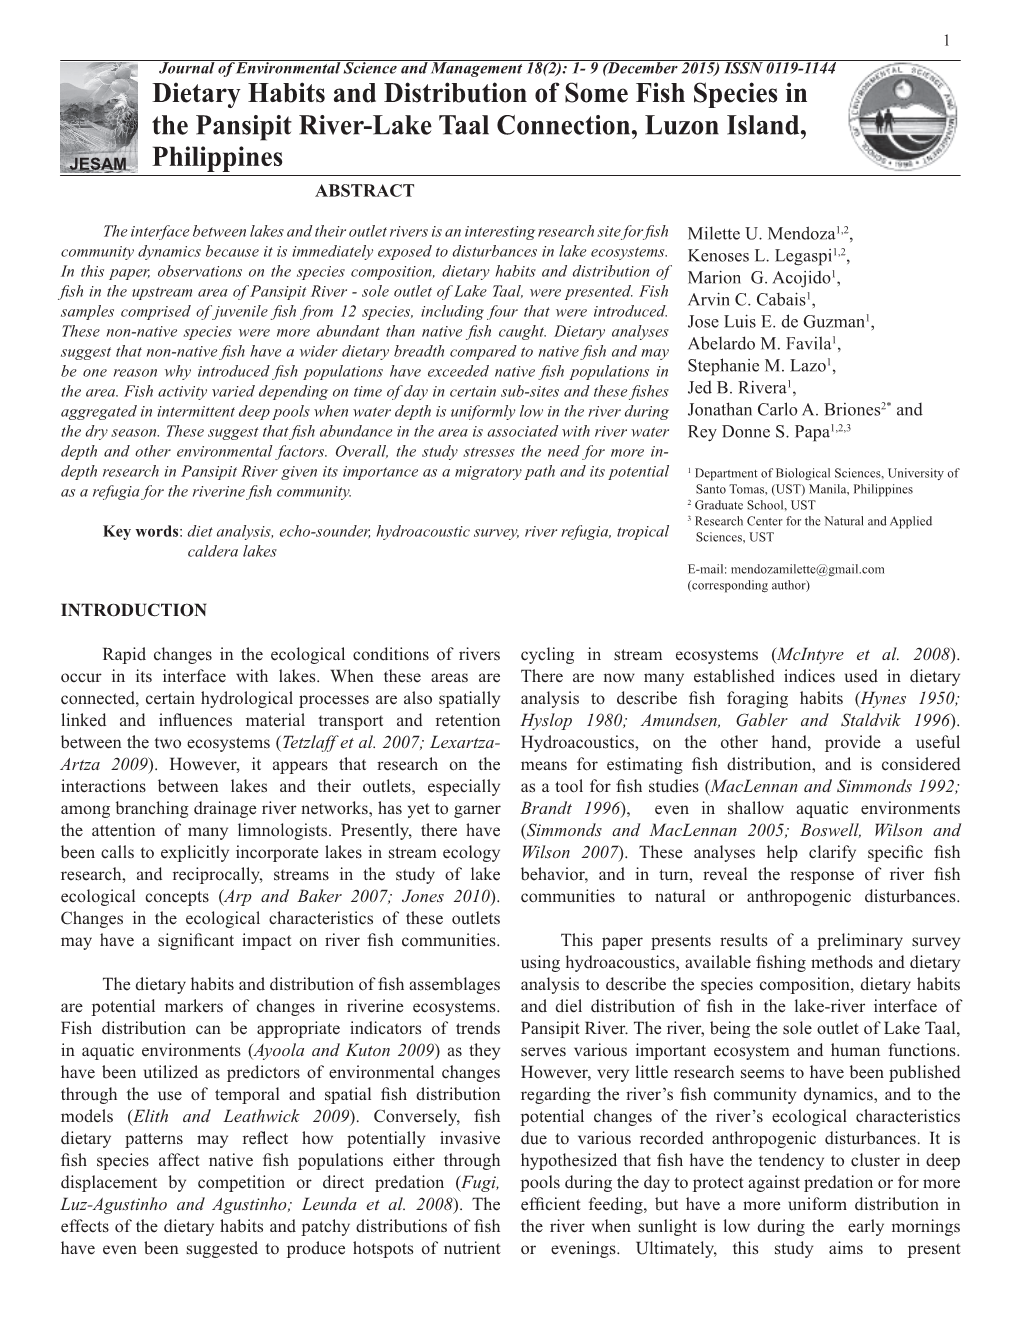 Dietary Habits and Distribution of Some Fish Species in the Pansipit River-Lake Taal Connection, Luzon Island, JESAM Philippines ABSTRACT